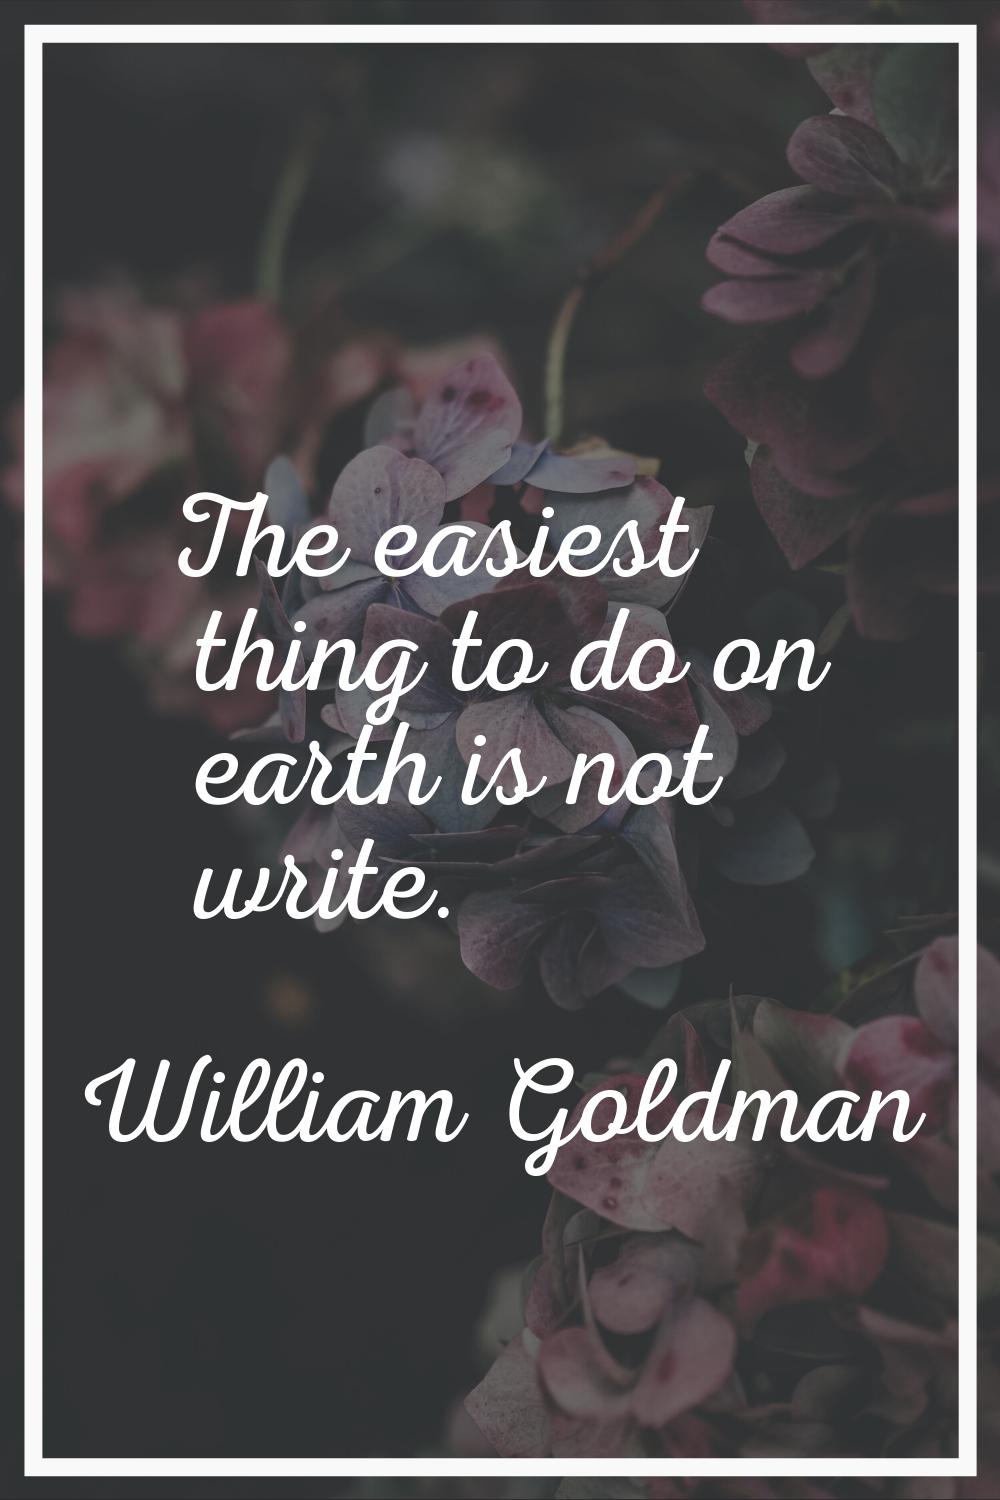 The easiest thing to do on earth is not write.